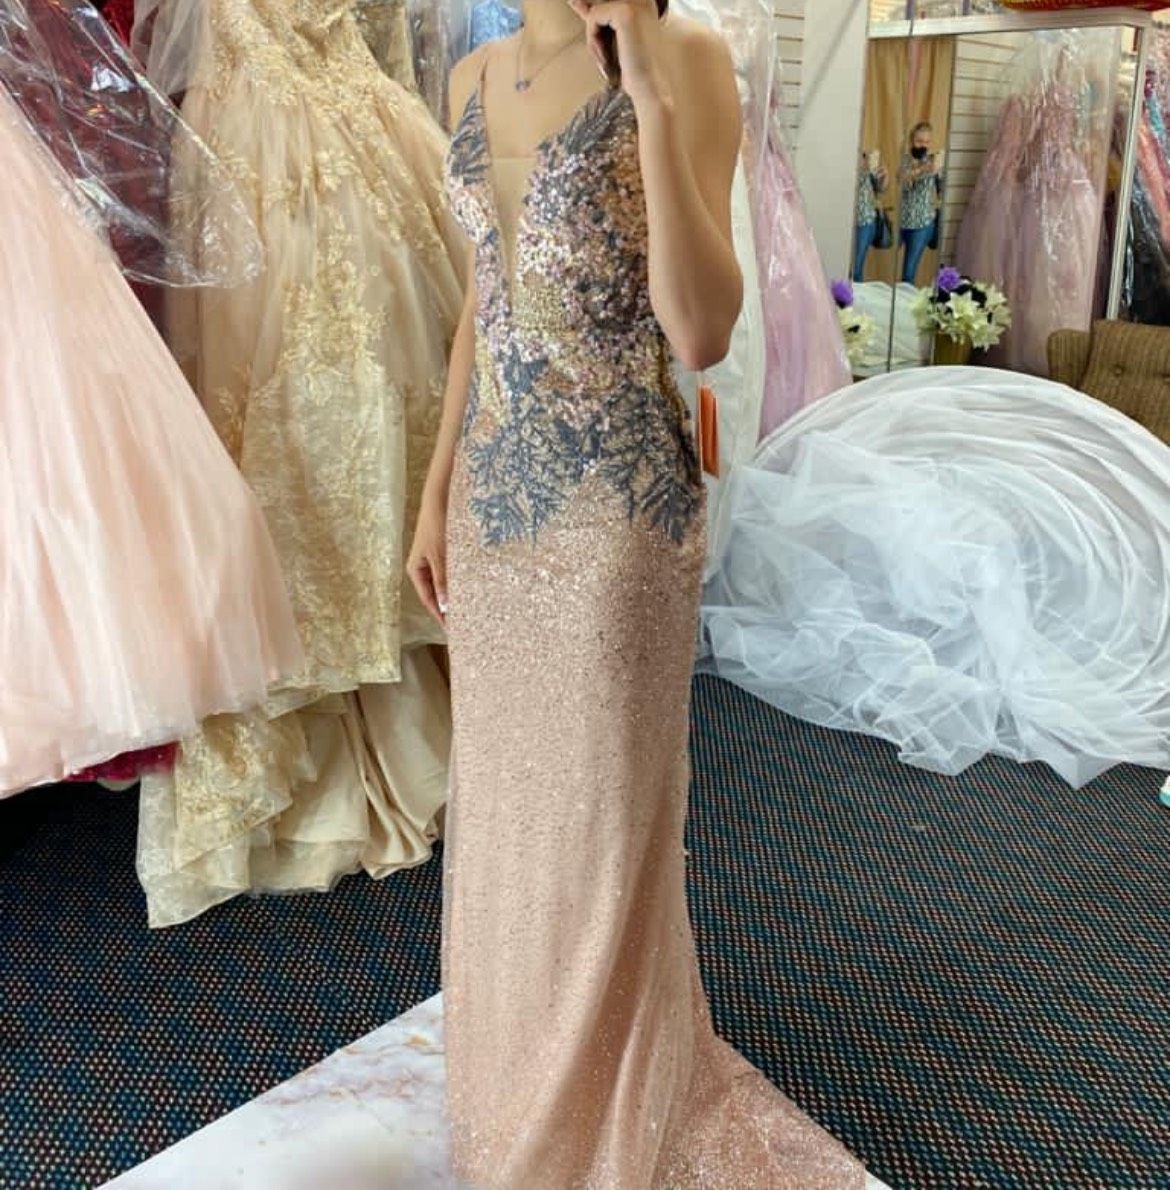 Size 0 Prom Nude Mermaid Dress on Queenly